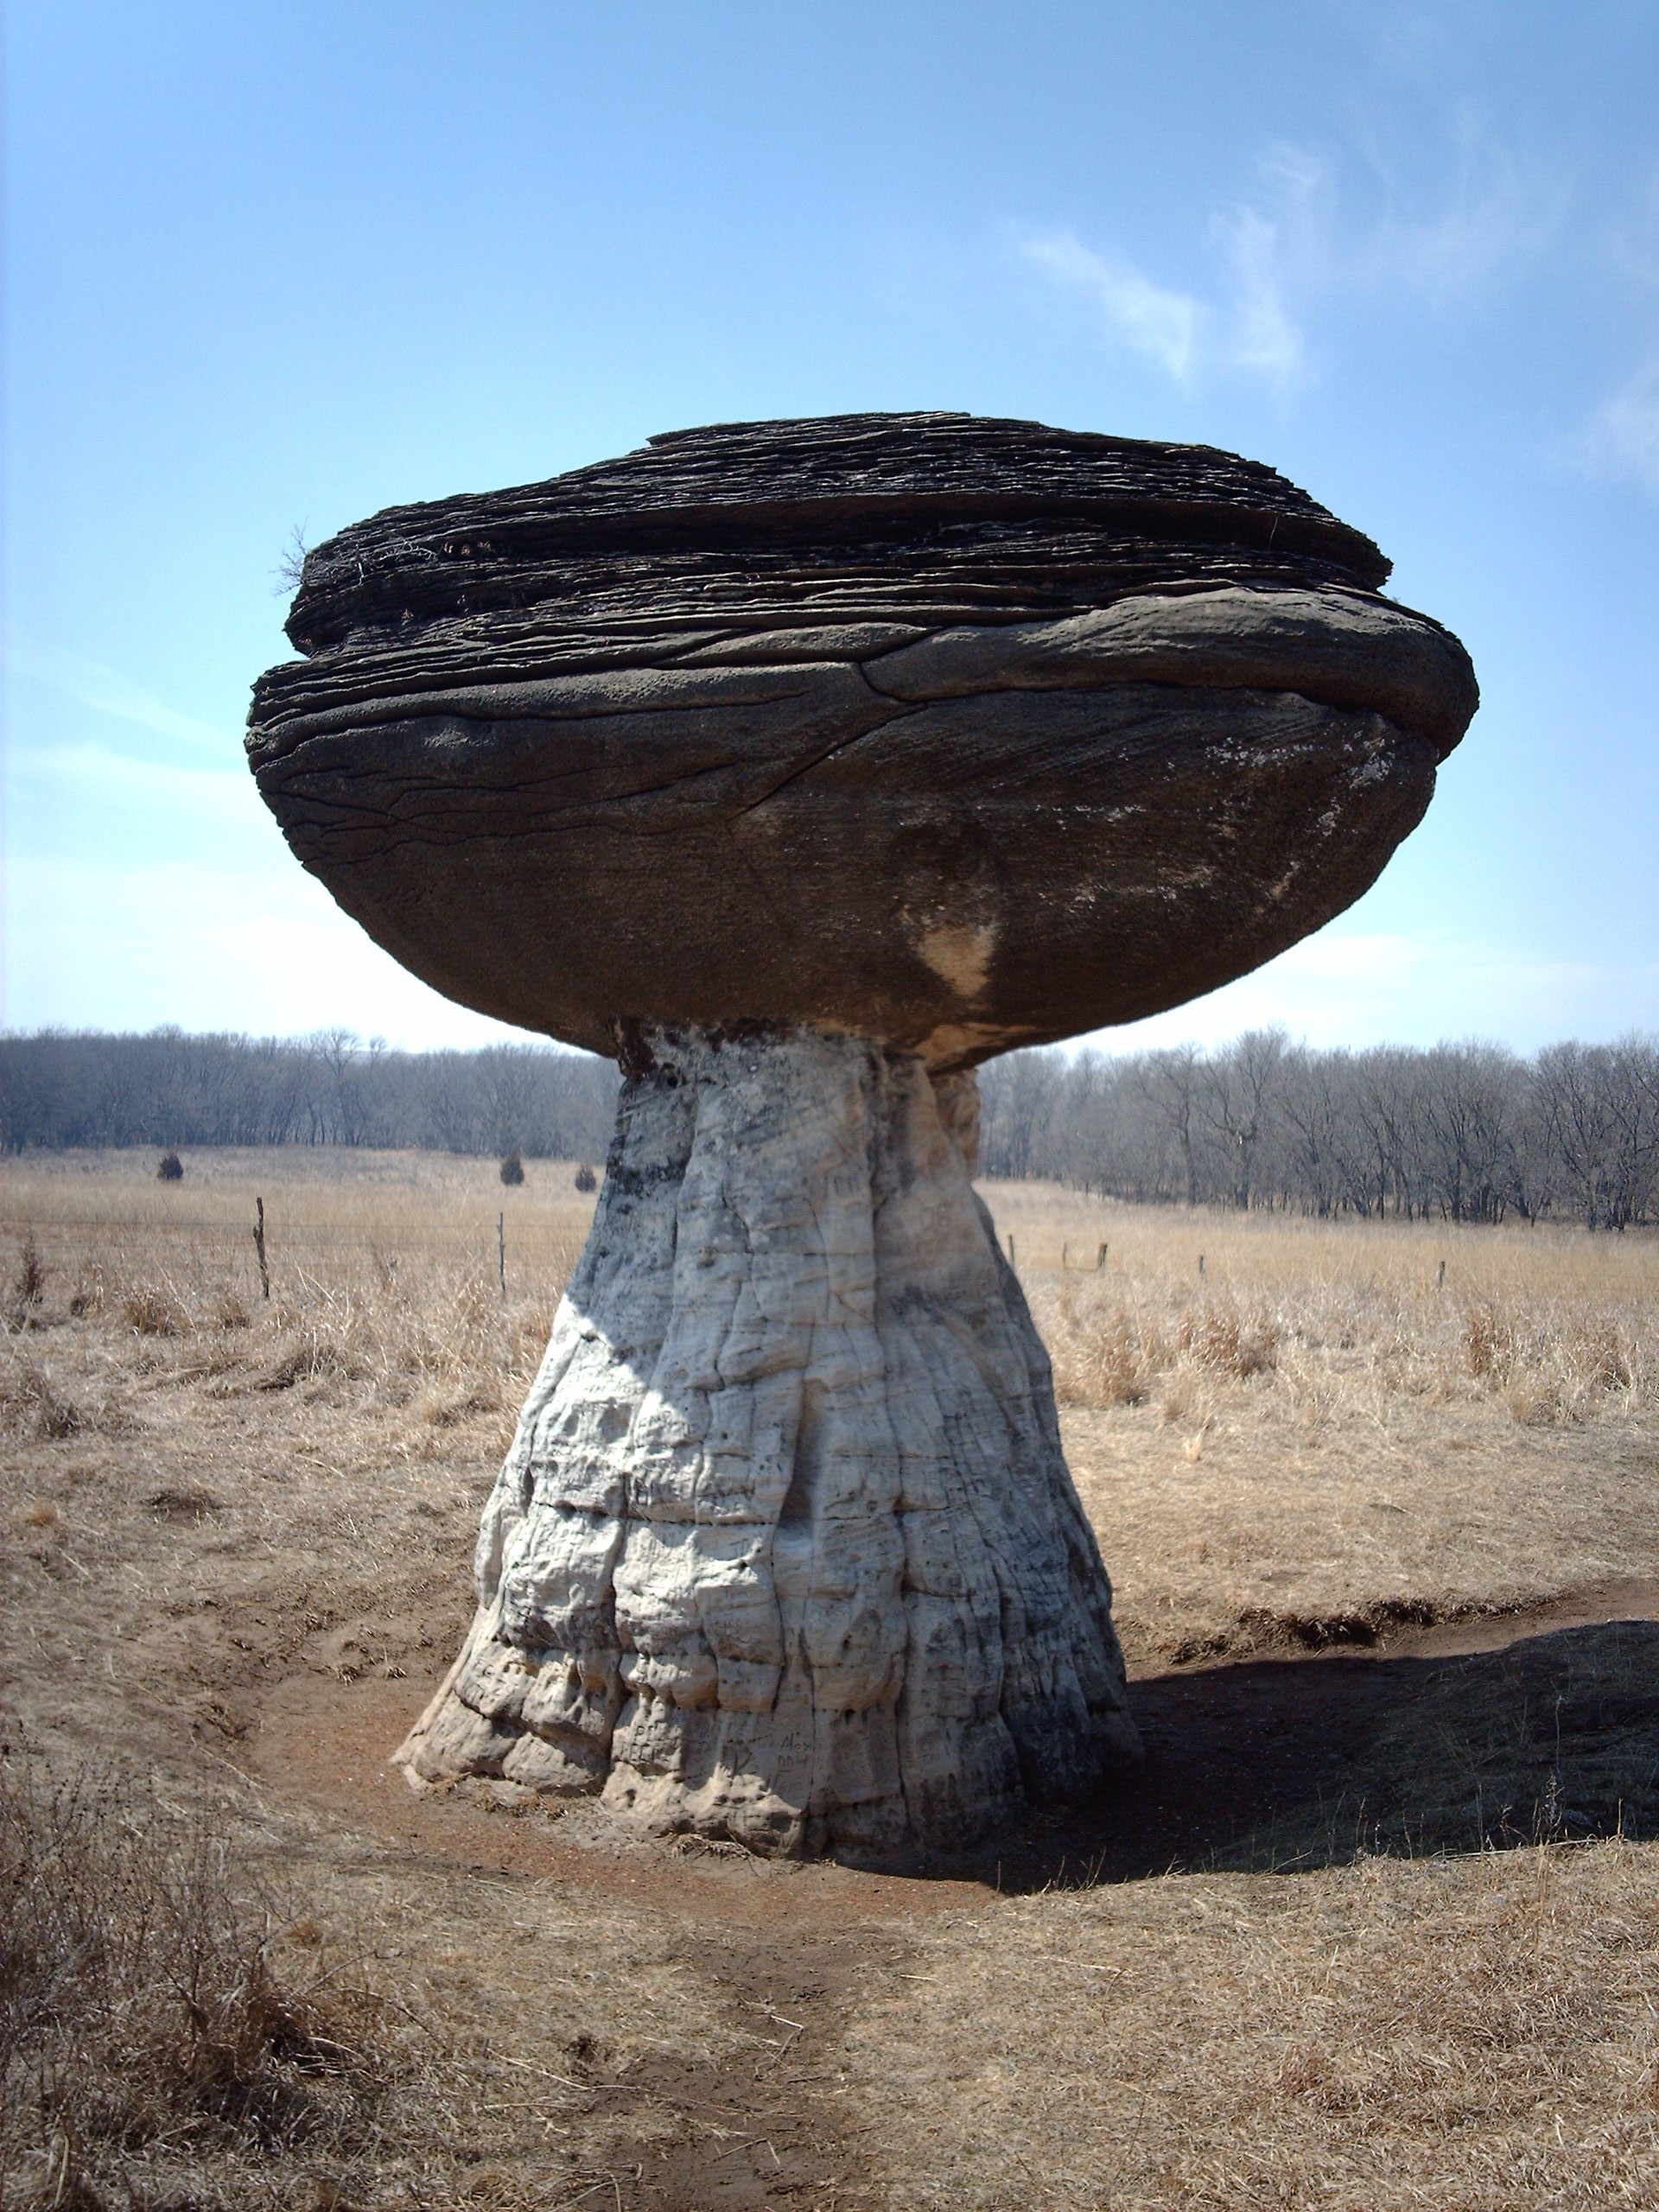 <p>Sedimentary rock → more and less resistant</p><p>Wind can only lift sand 1.5m off the ground → mushroom blocks</p>